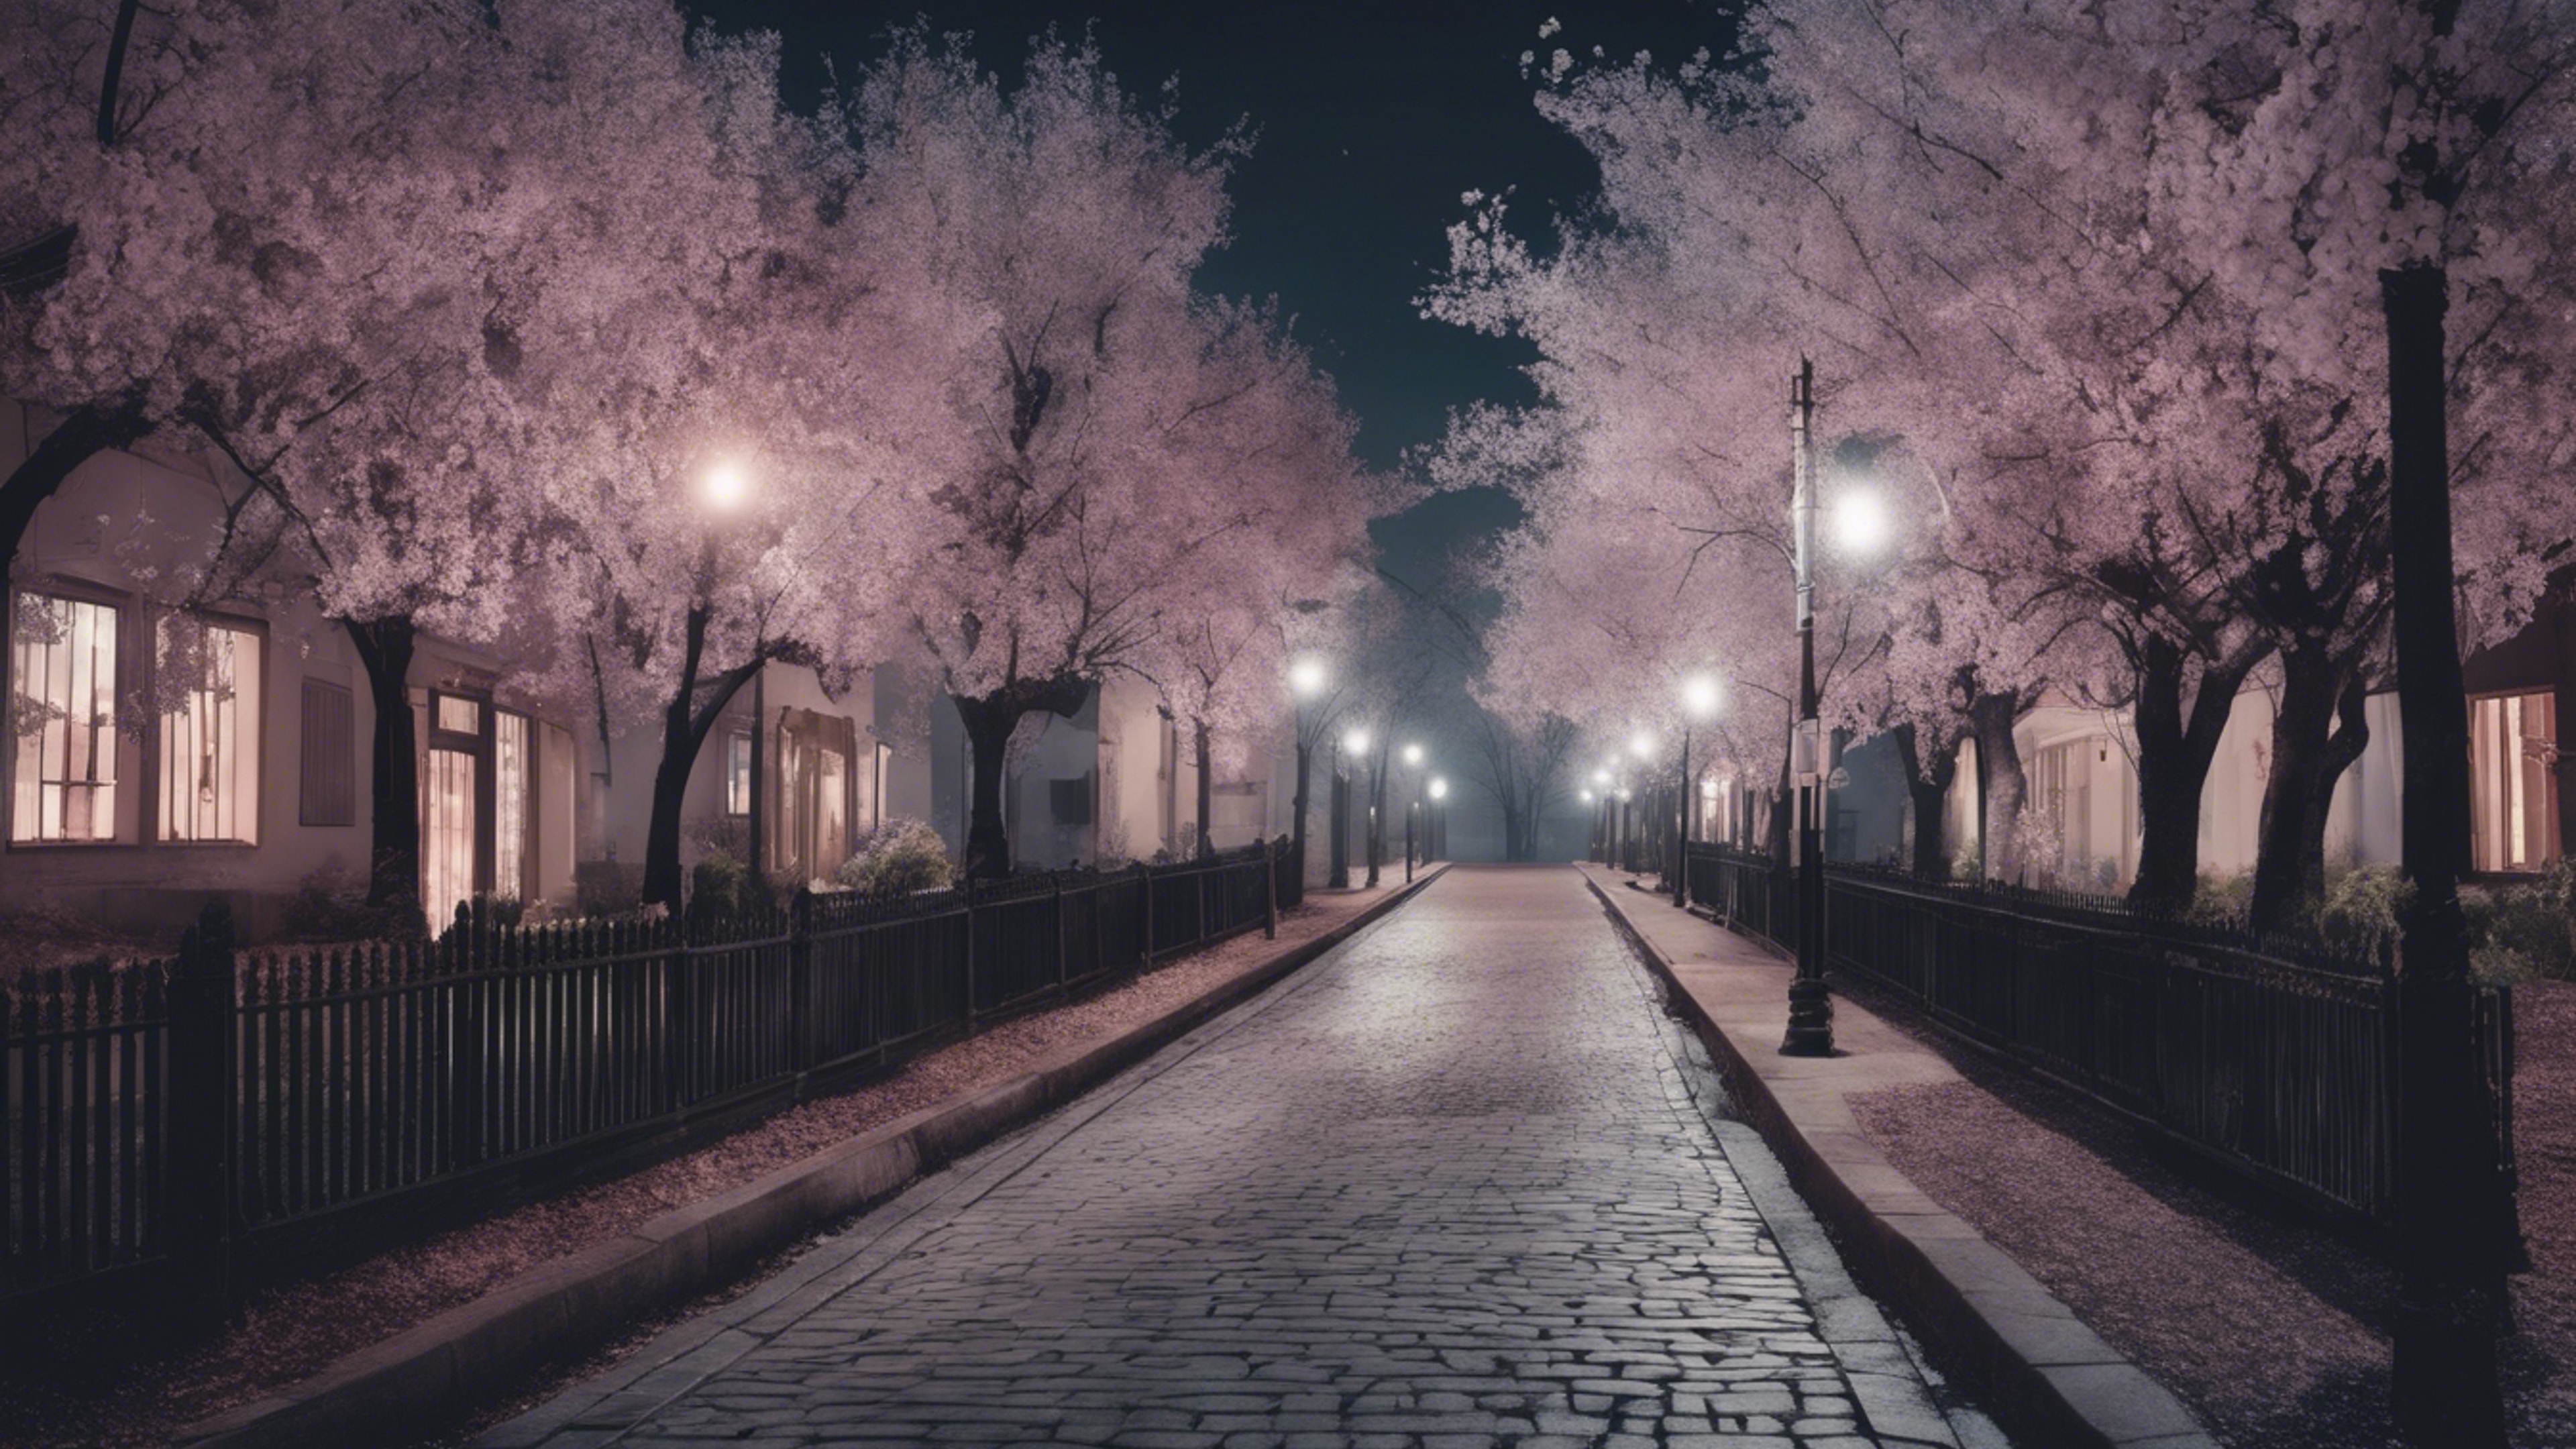 Pastel gothic street lined with black blossom trees under the ghostly night sky. Sfondo[dc1e1b7f0a0c4838b6b6]